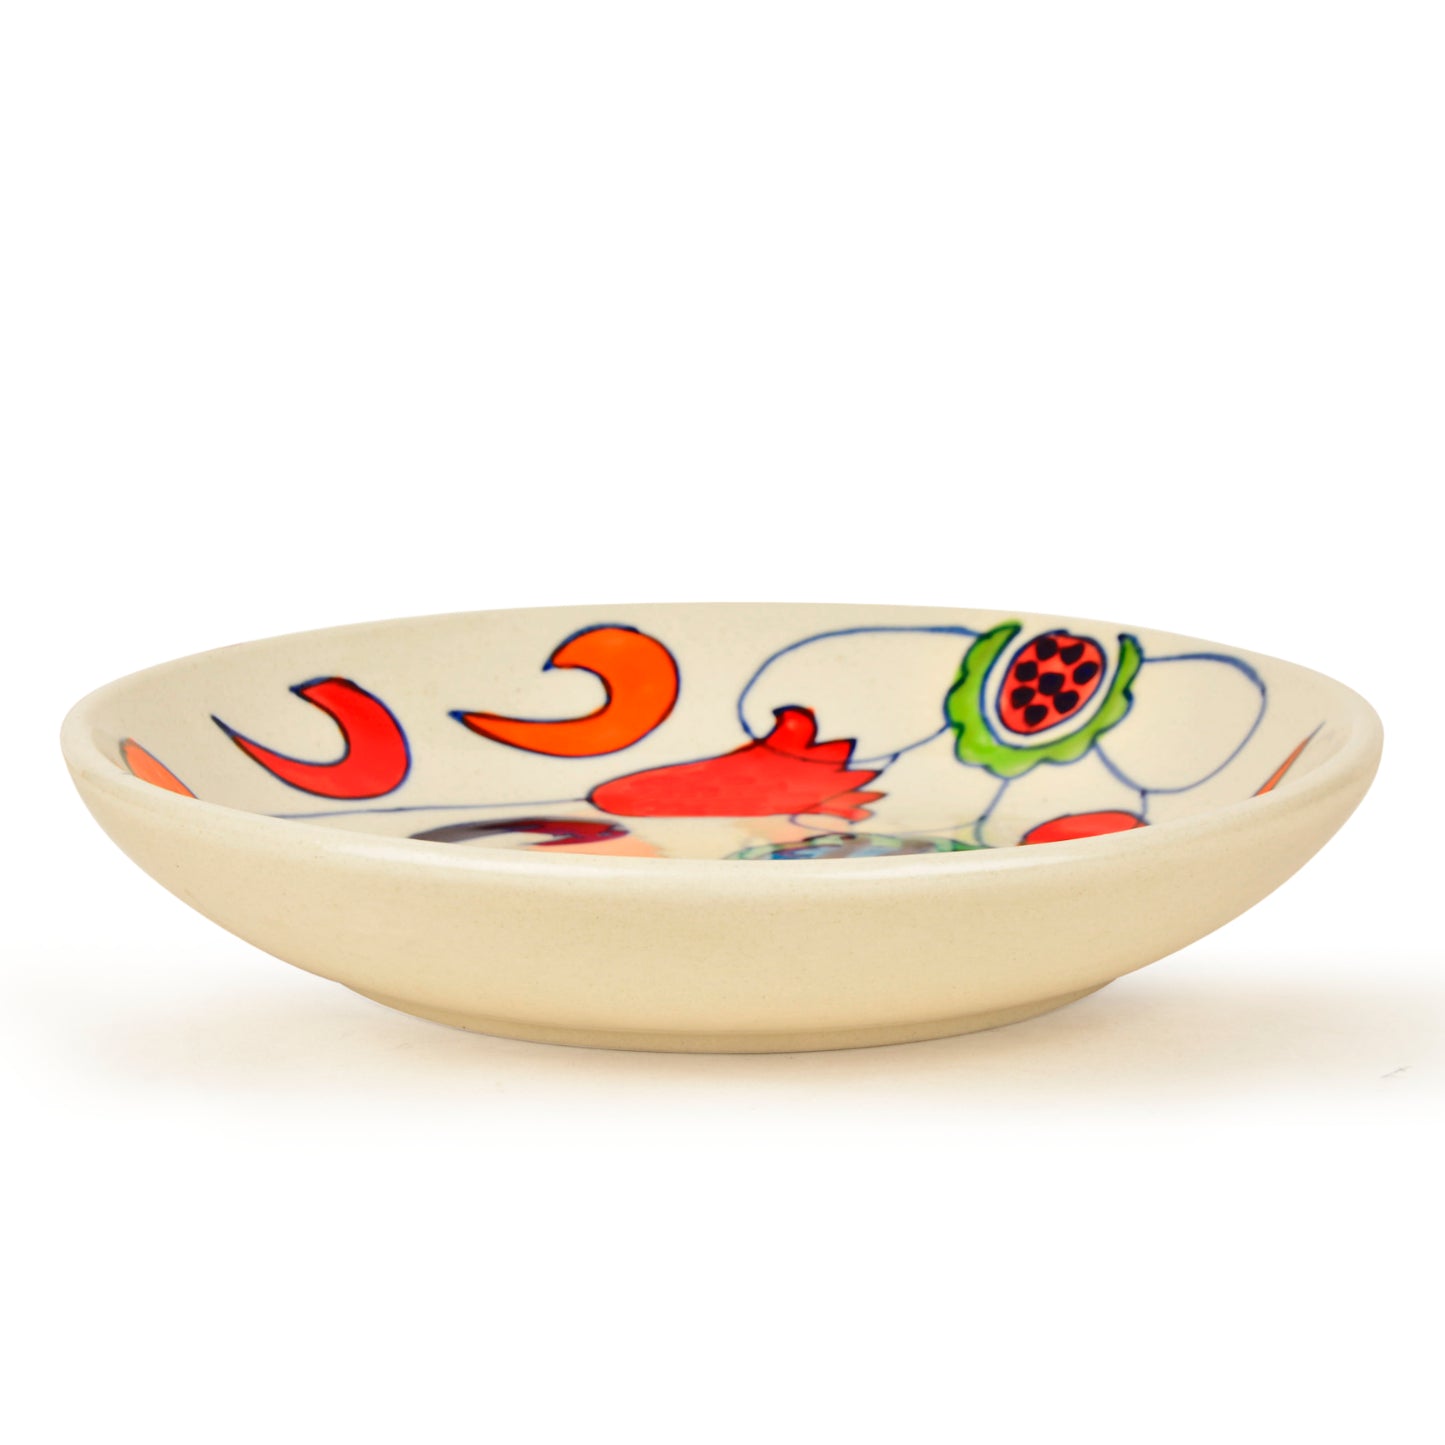 Hand Painted Chic and Sleek Ceramic Shallow Serving Bowl (8.5 icnhes , Multicolor)